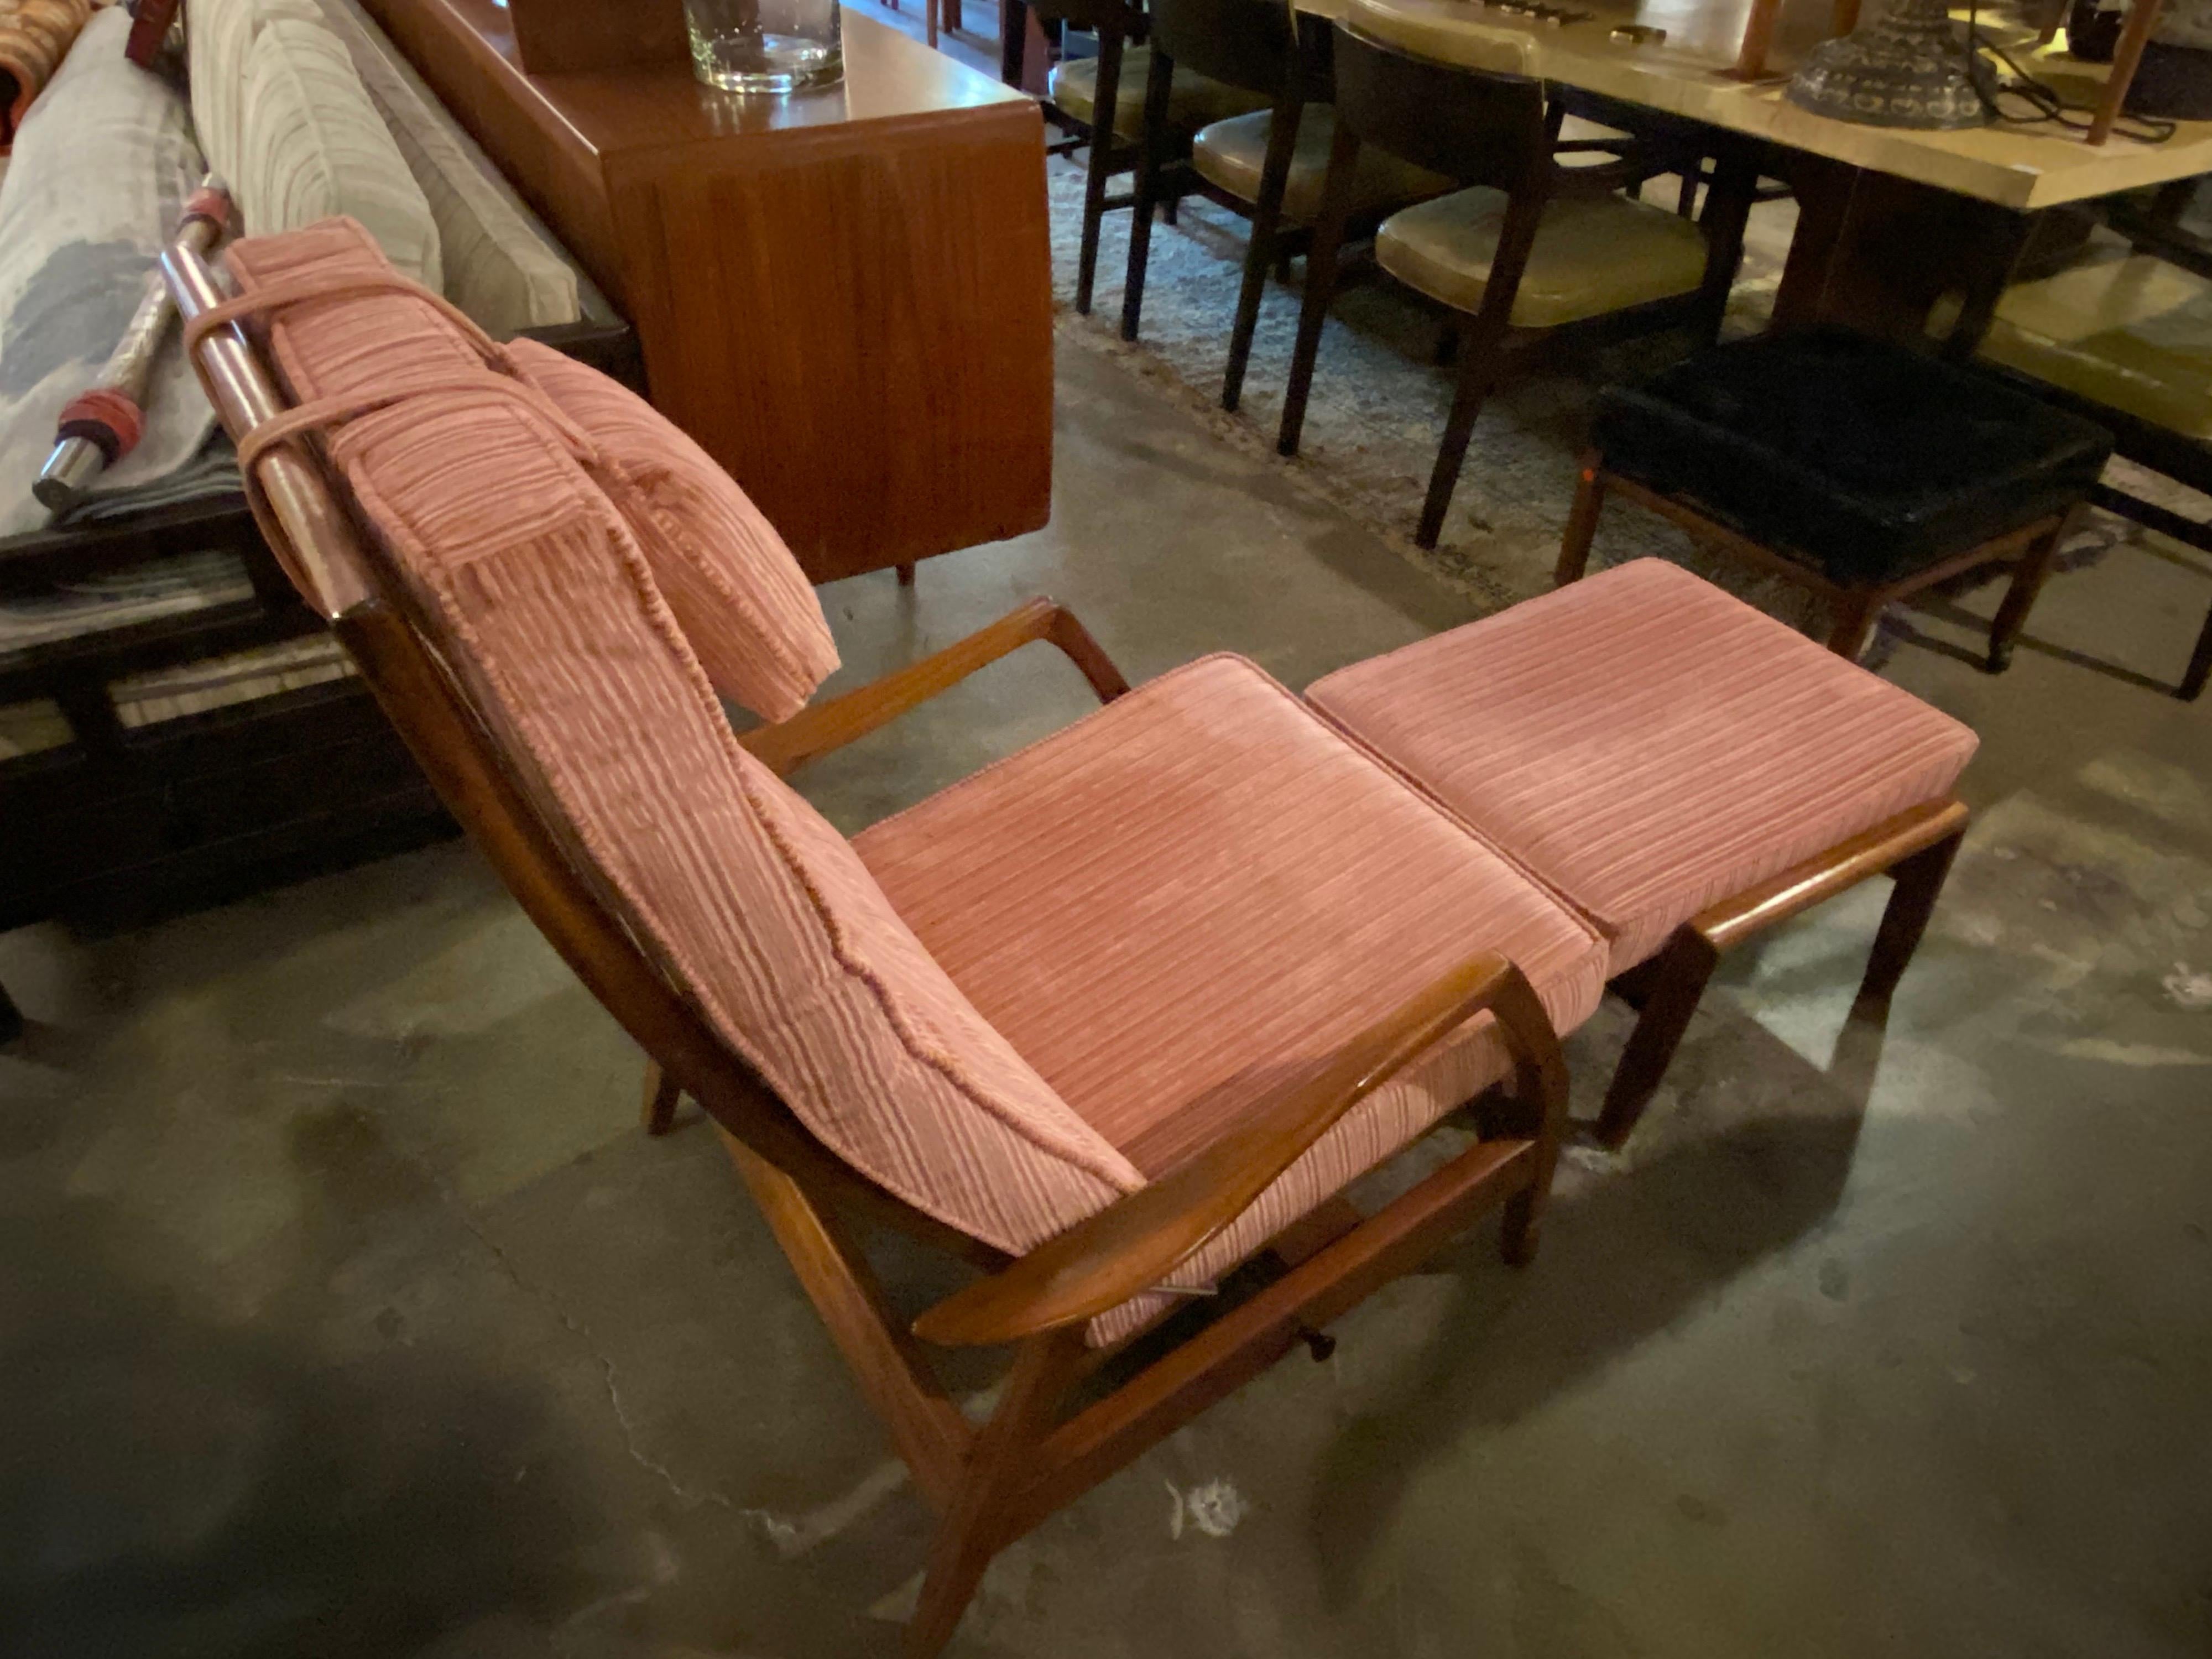 Mid-Century Modern recliner and footstool designed by Milo Baughman. This vintage recliner is adjustable and can be used as a rocker as well. The footstool can lie flat or be adjusted to an incline. Frame is made of walnut and fabric is textile with